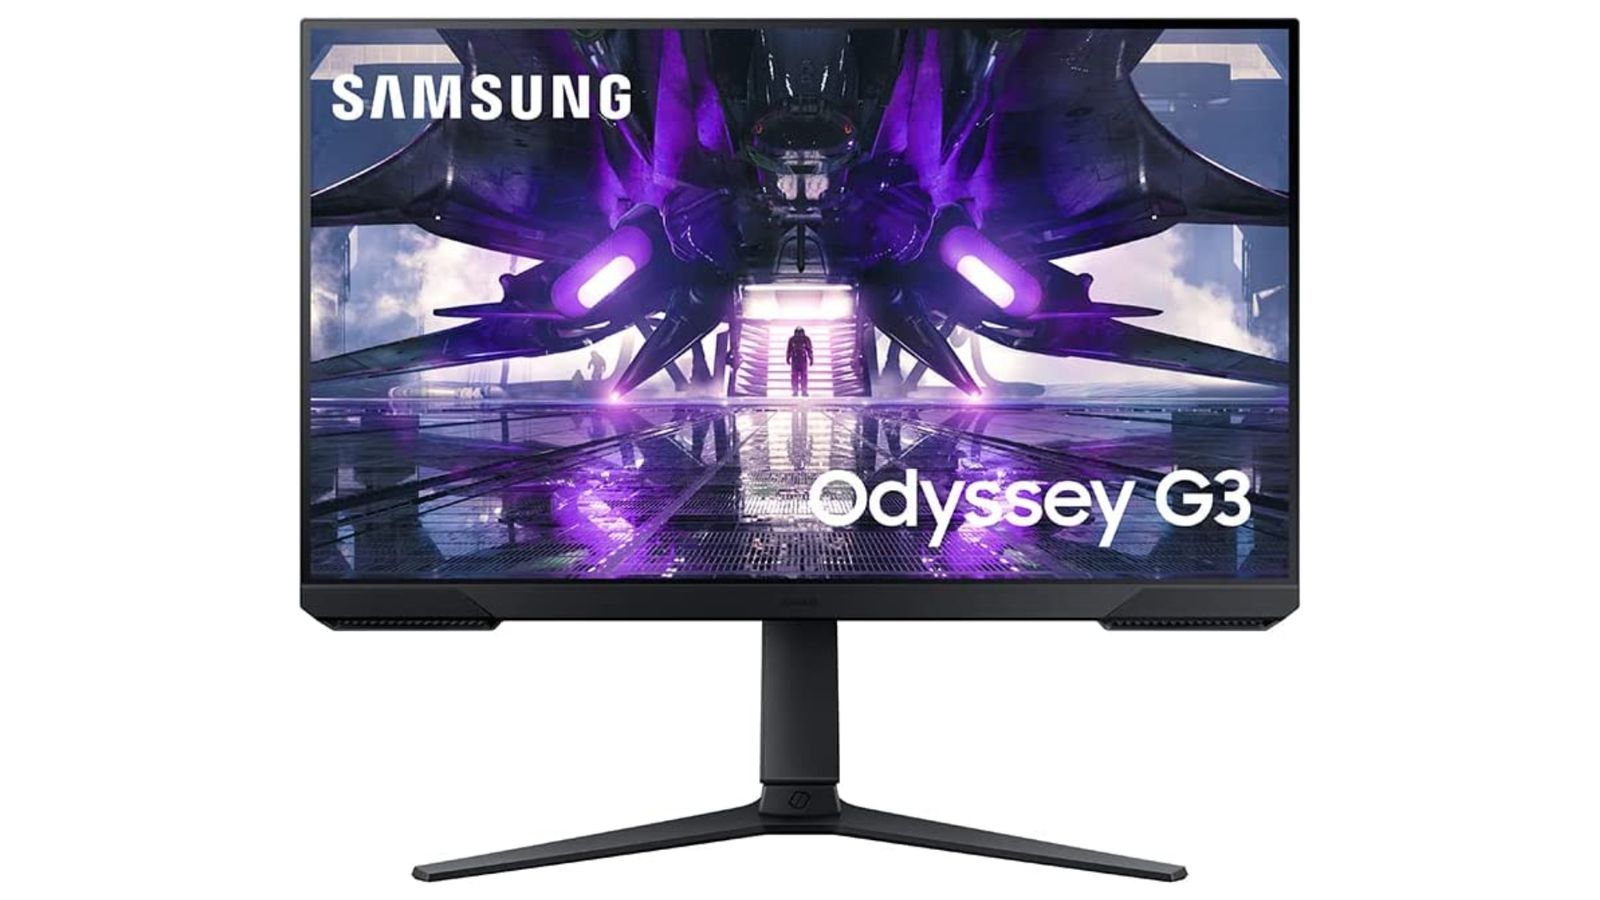 Samsung Odyssey G32A product image of a black monitor with a purple and white sci-fi scene on the display